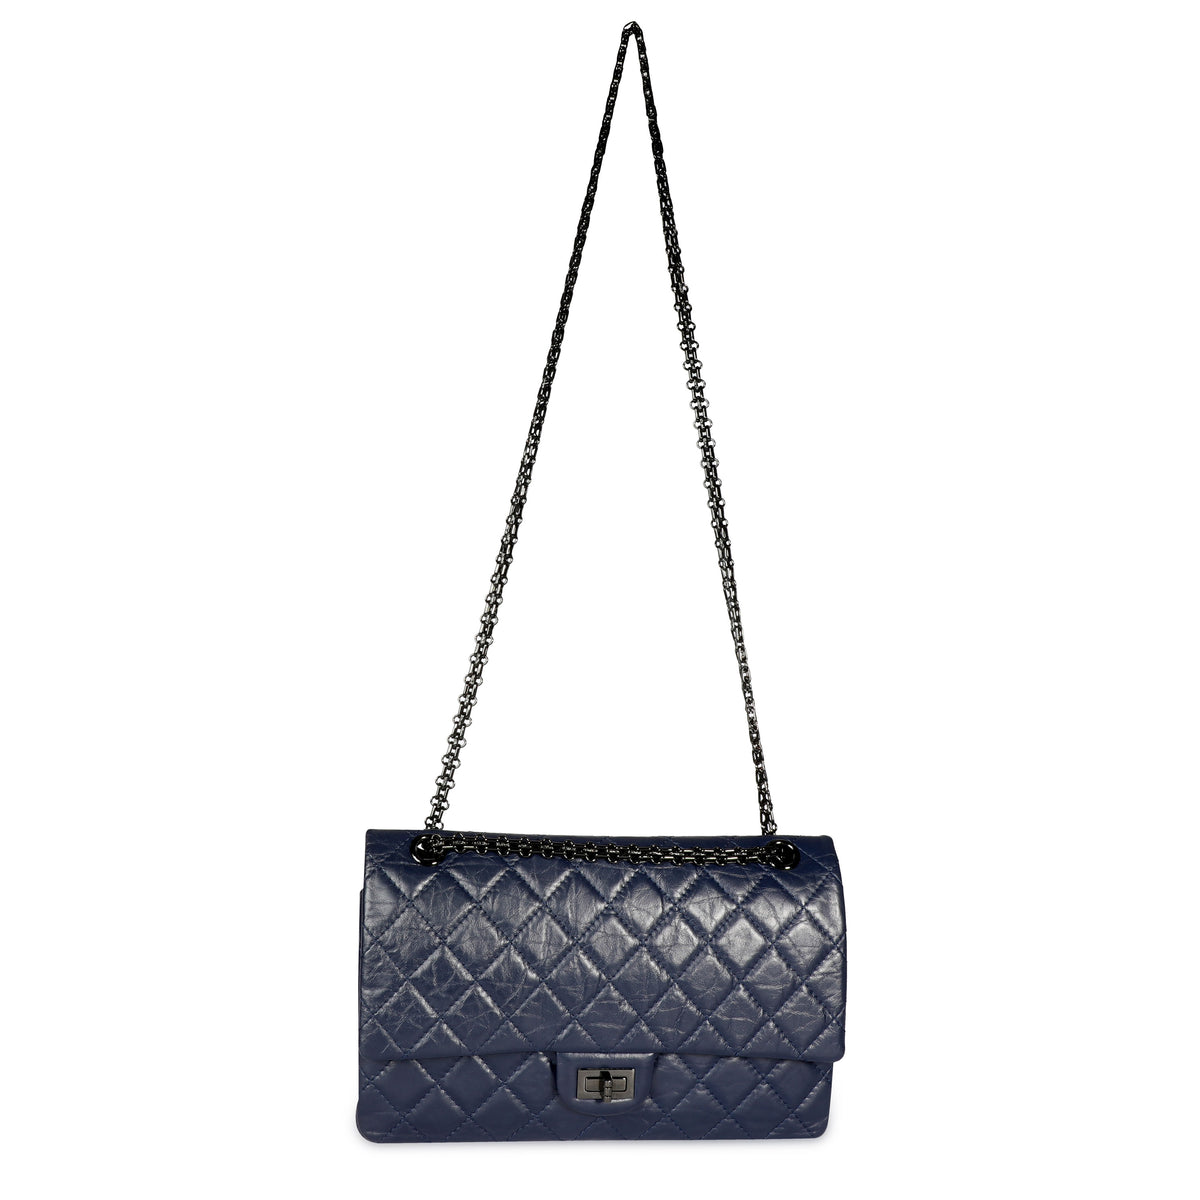 Chanel Navy Quilted Aged Calfskin 2.55 Reissue 226 Bag